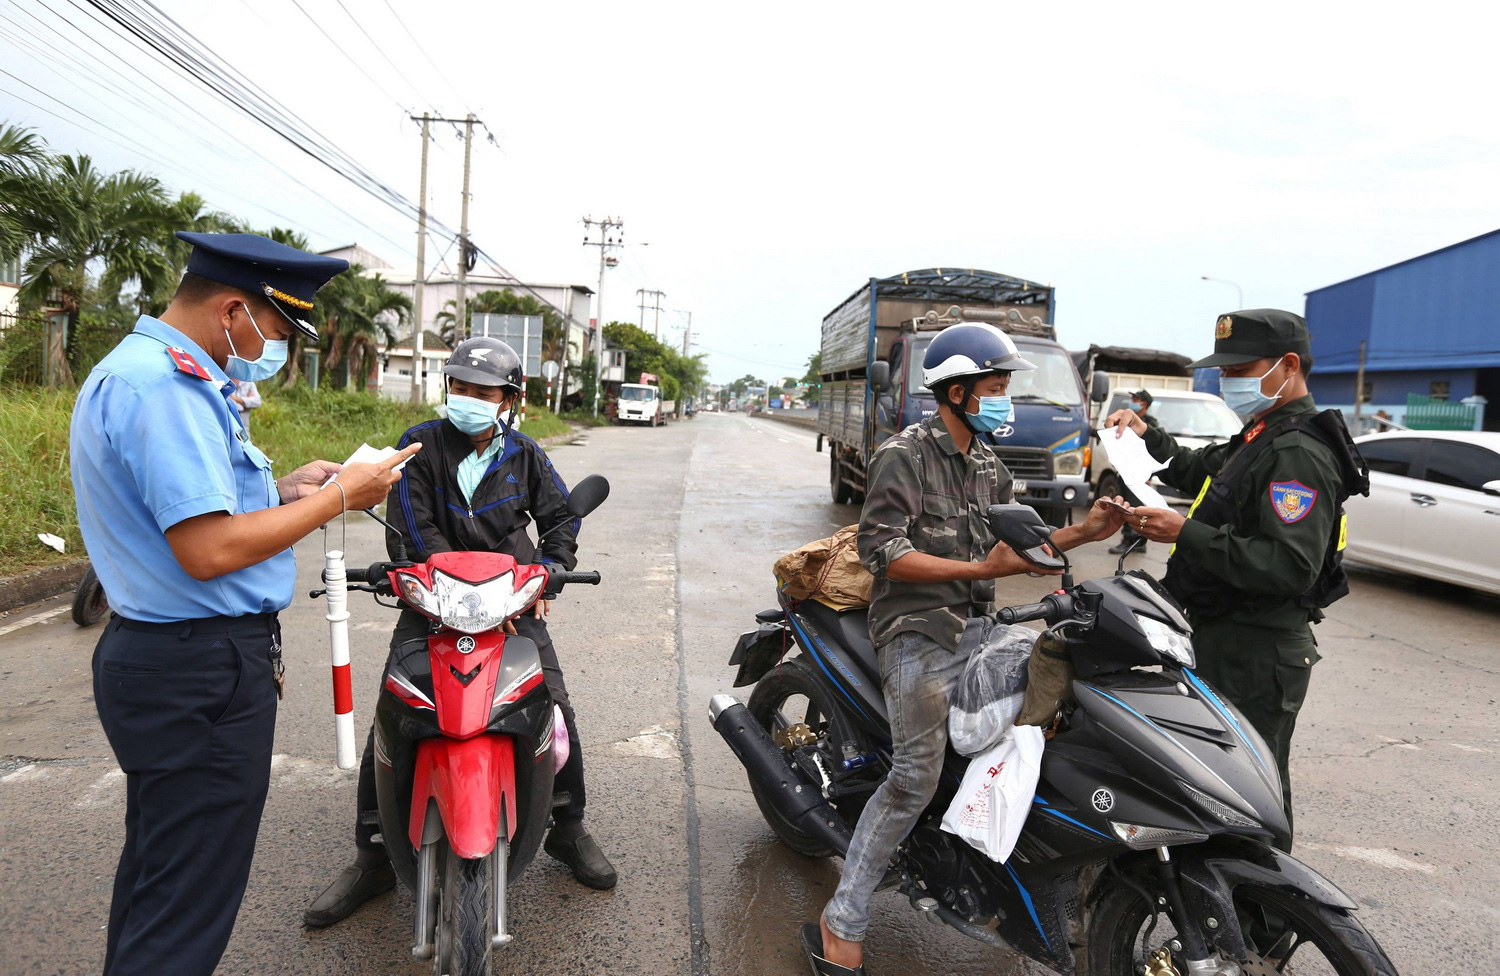 Travelers present their COVID-19 test results at a checkpoint in Dong Nai Province, Vietnam. Photo: Nhat Thinh / Tuoi Tre